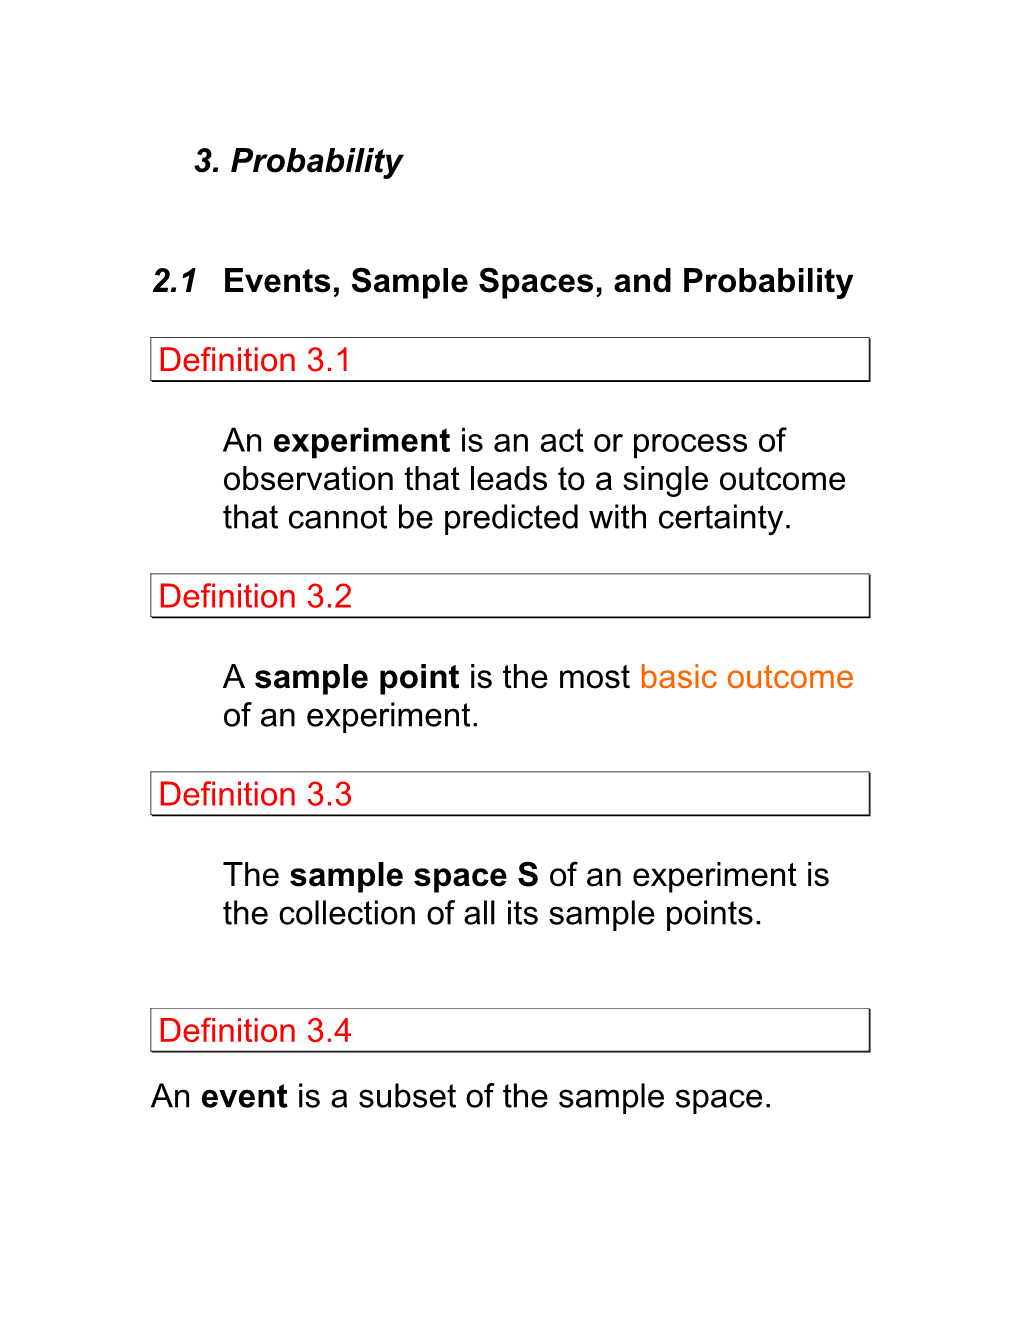 3.1Events, Sample Spaces, and Probability